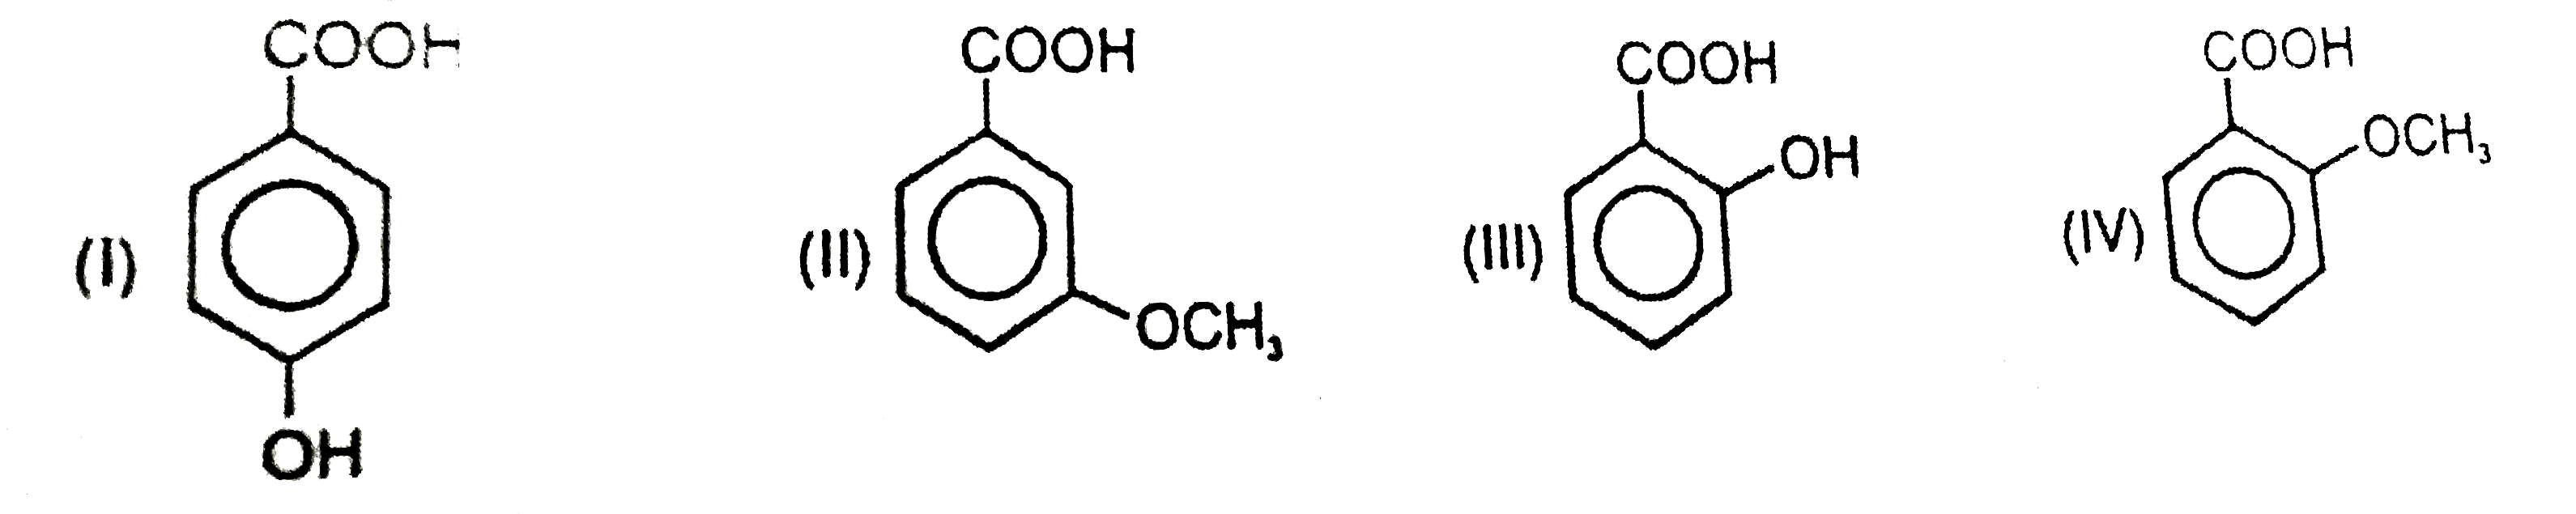 Ortho effect is special type of effect that is shown by o-subsituents .This ortho-effect operates at the benzoic acids irrespective of the polar type. Nearly all o-substituted benzoic acid are stronger than benzoic acid. Benzoic acid is a resonance stabilised and so the carboxyl group is coplaner with the ring. An o-subsituent tends to prevent this coplanarity.   Which among the following will be the strongest acid ?